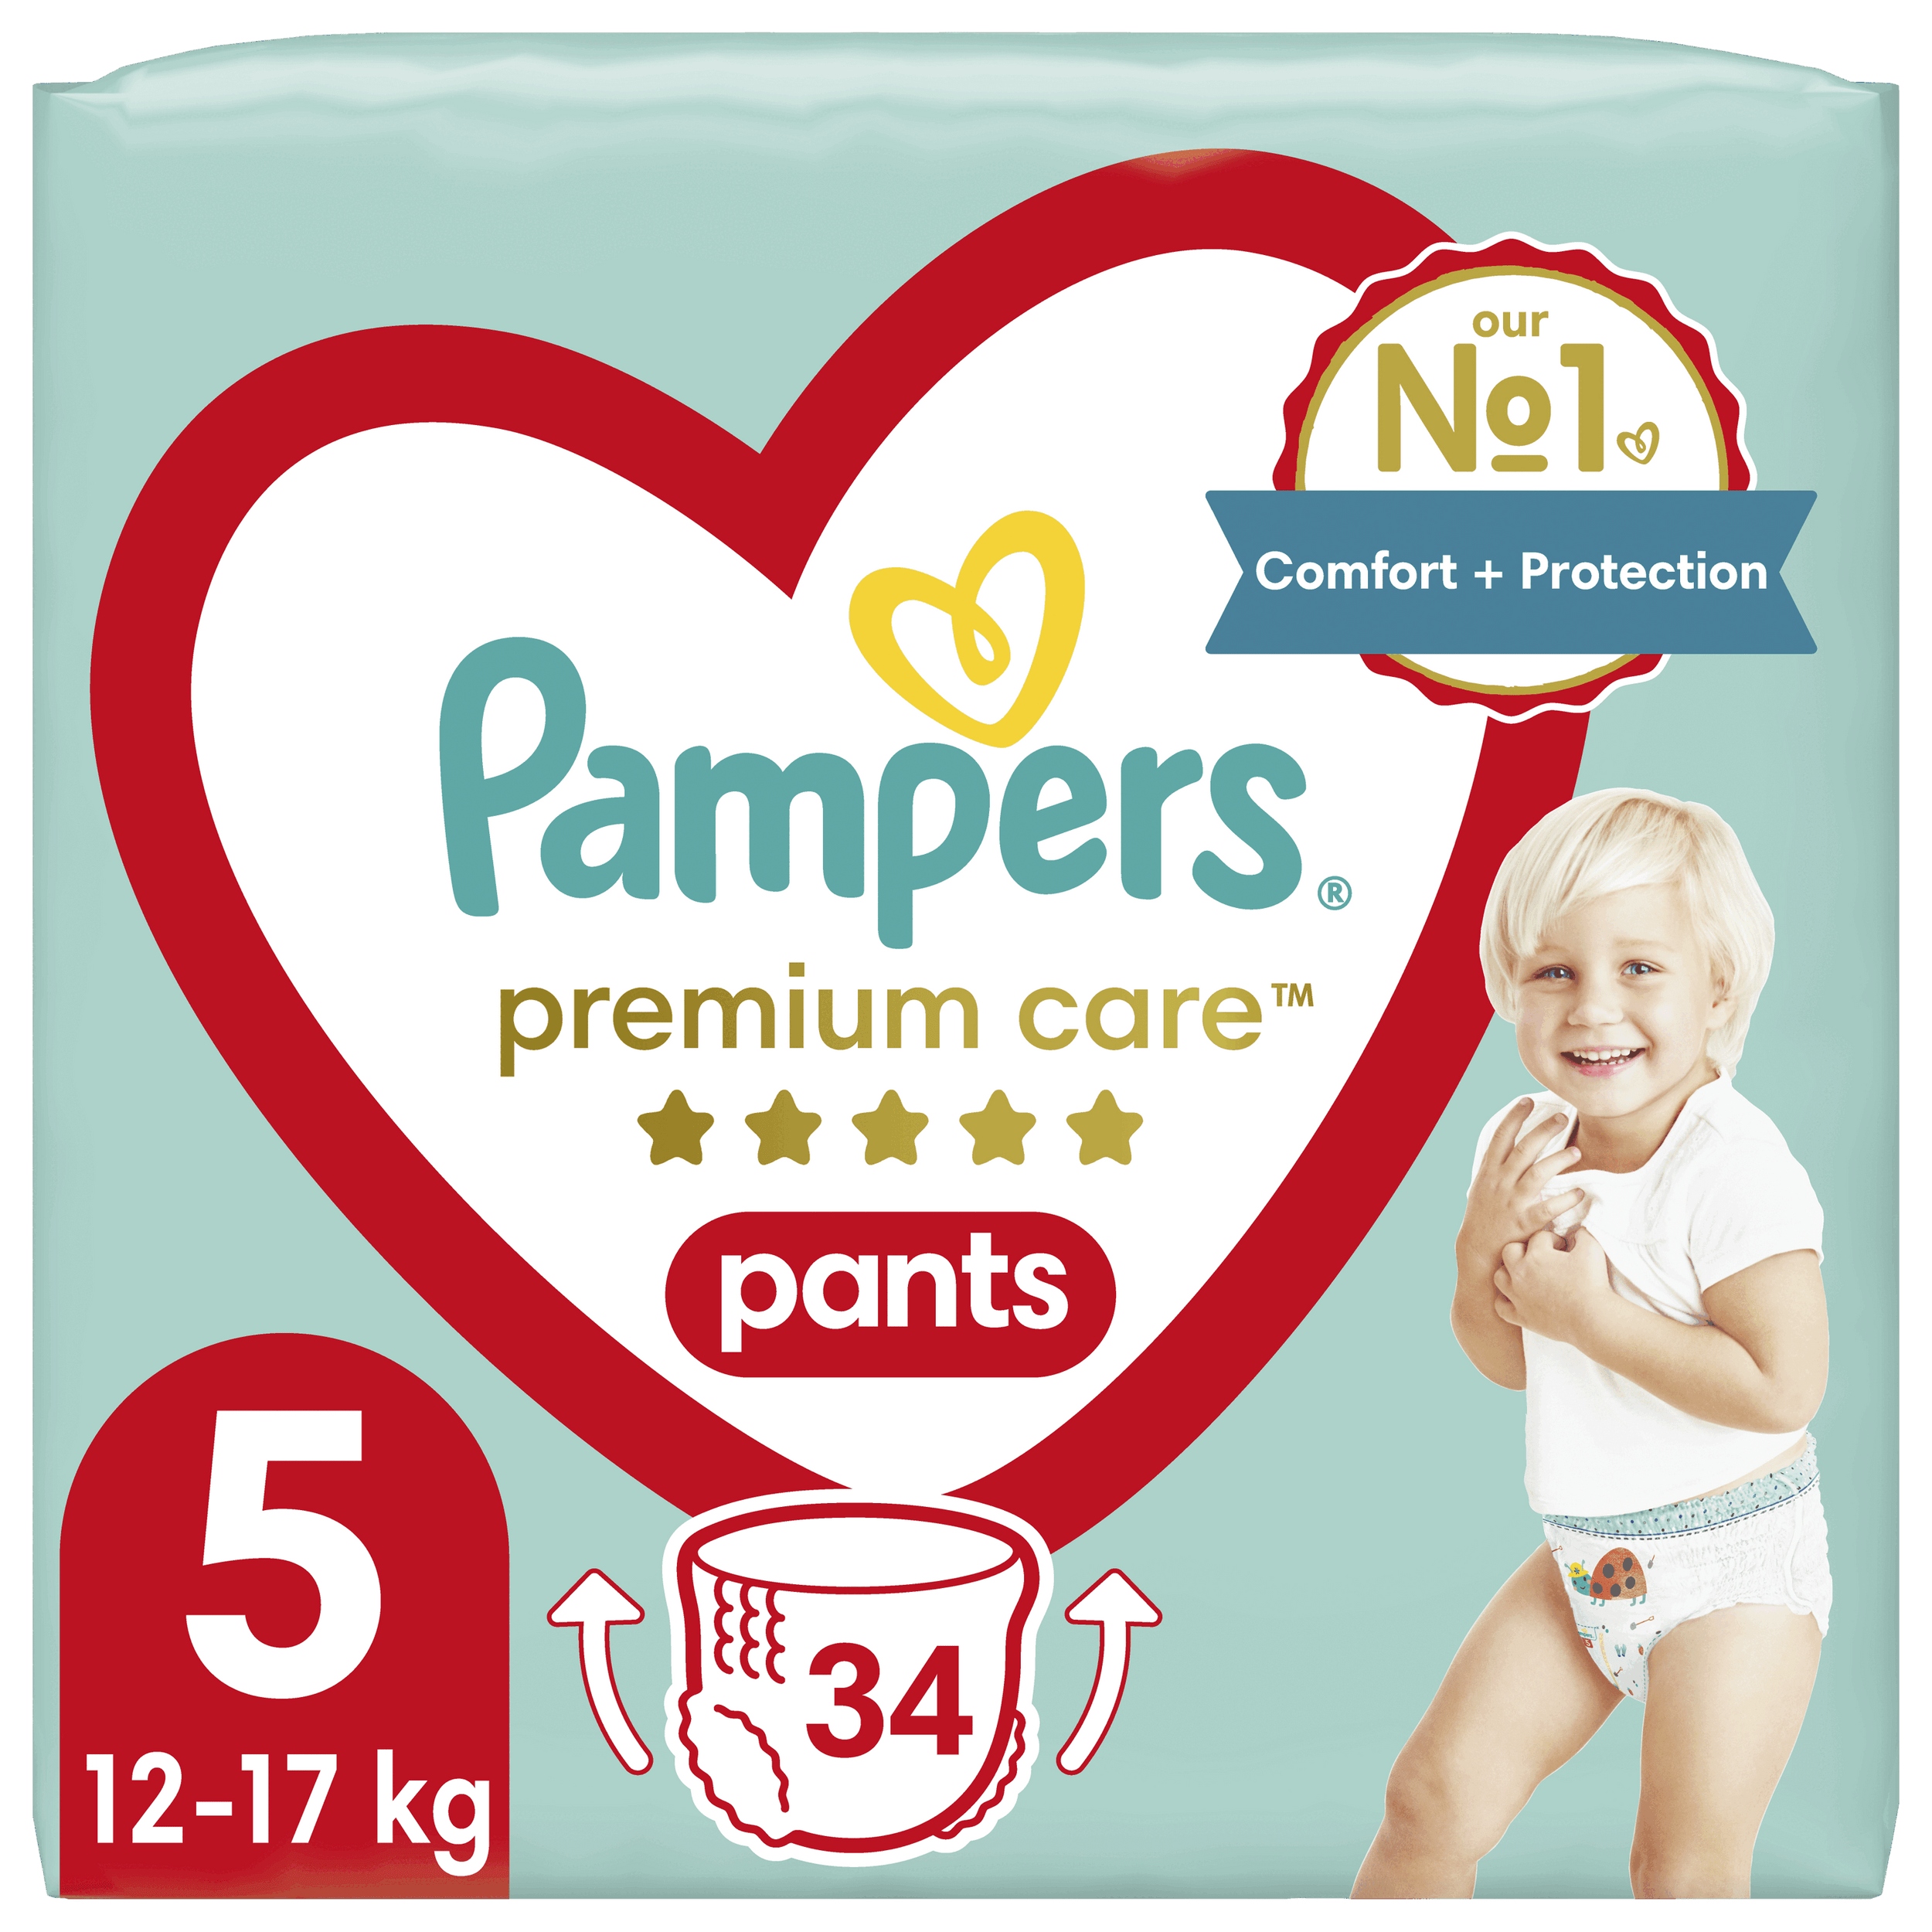 pampers pure harmony difference couches